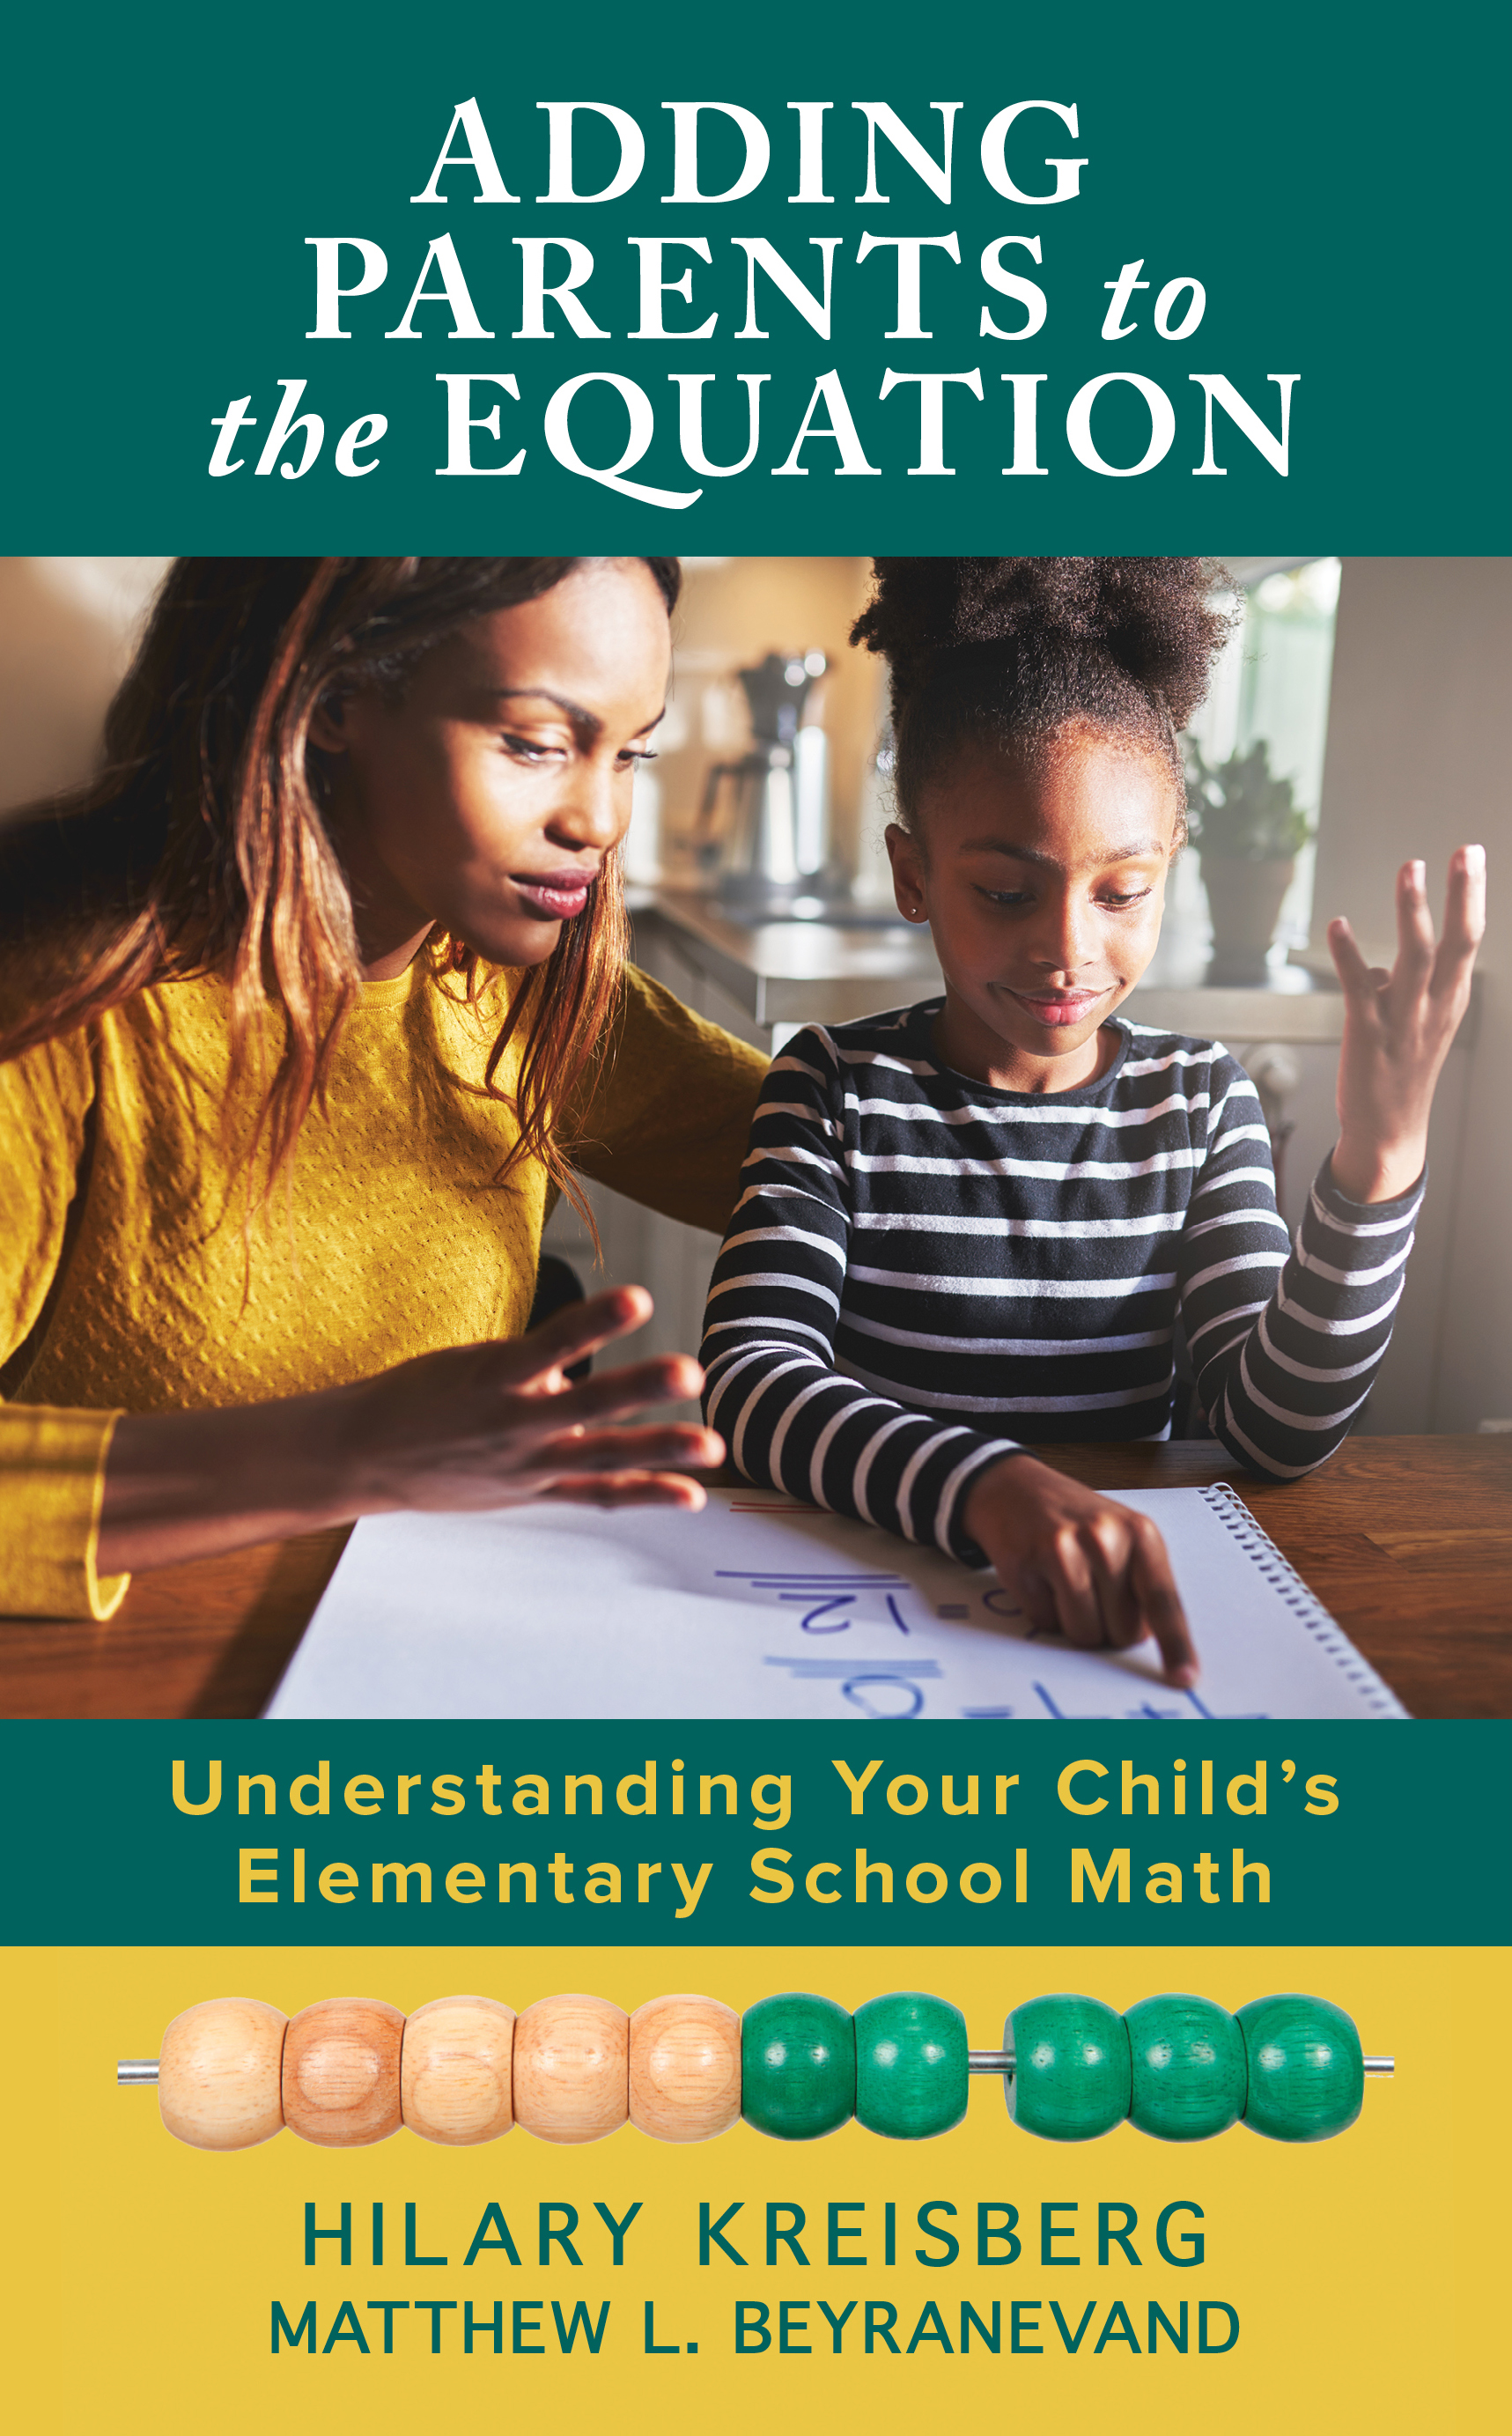 Adding Parents to the Equation: Understanding Your Child’s Elementary School Math